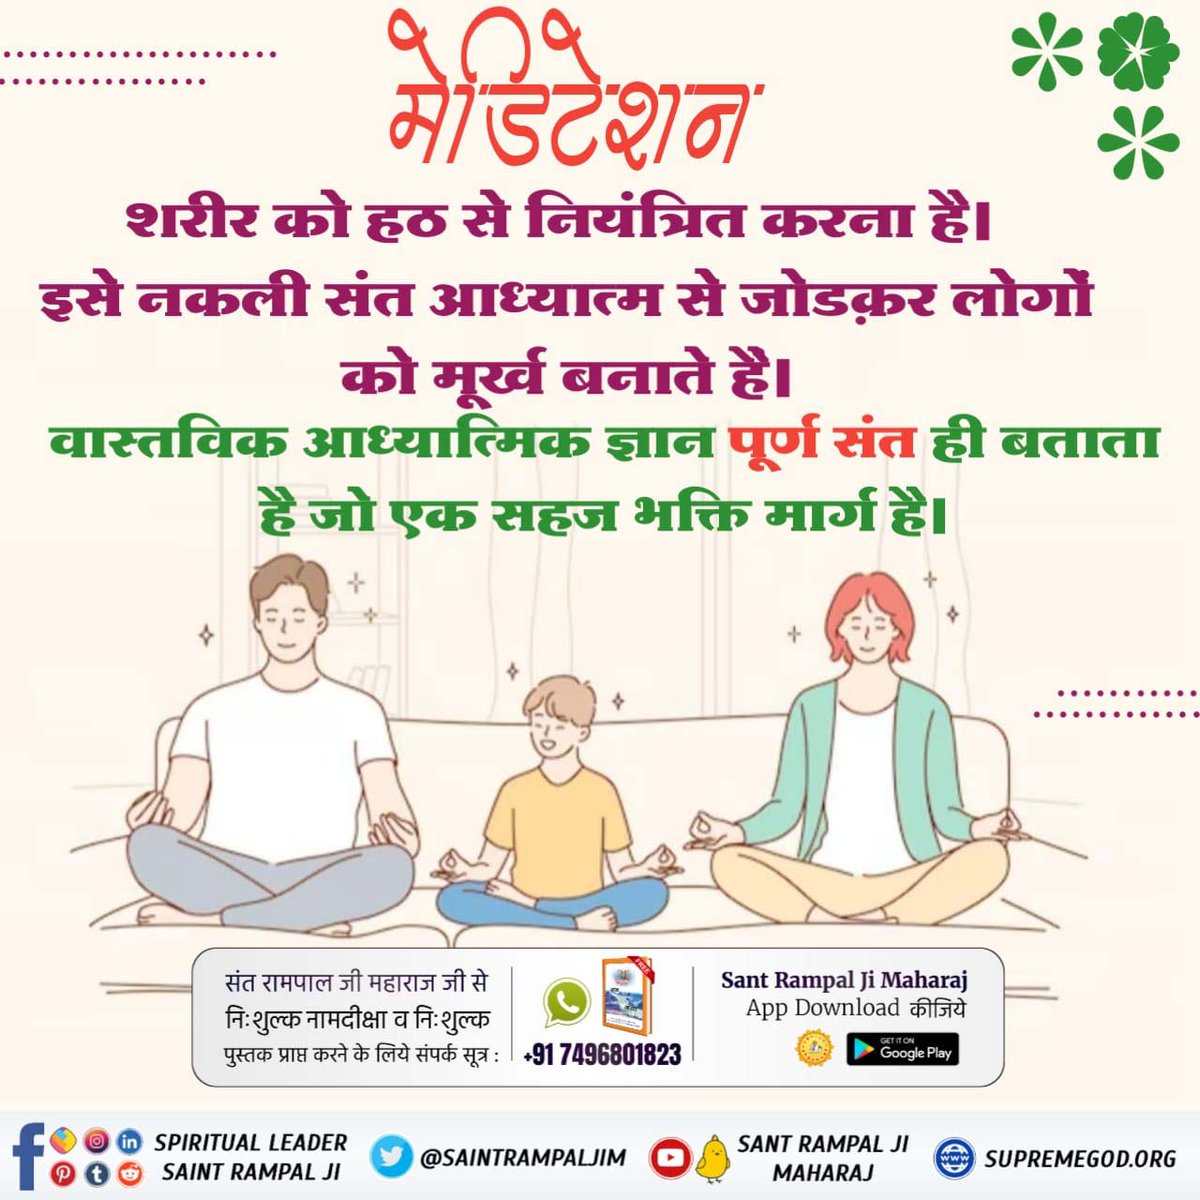 Sahaj Samadhi, simple meditation or the true way of devotion is a practice in which God-loving souls take refuge in an enlightened saint who provides initiation means grants true salvation mantras.
#What_Is_Meditation
Sant Rampal Ji Maharaj